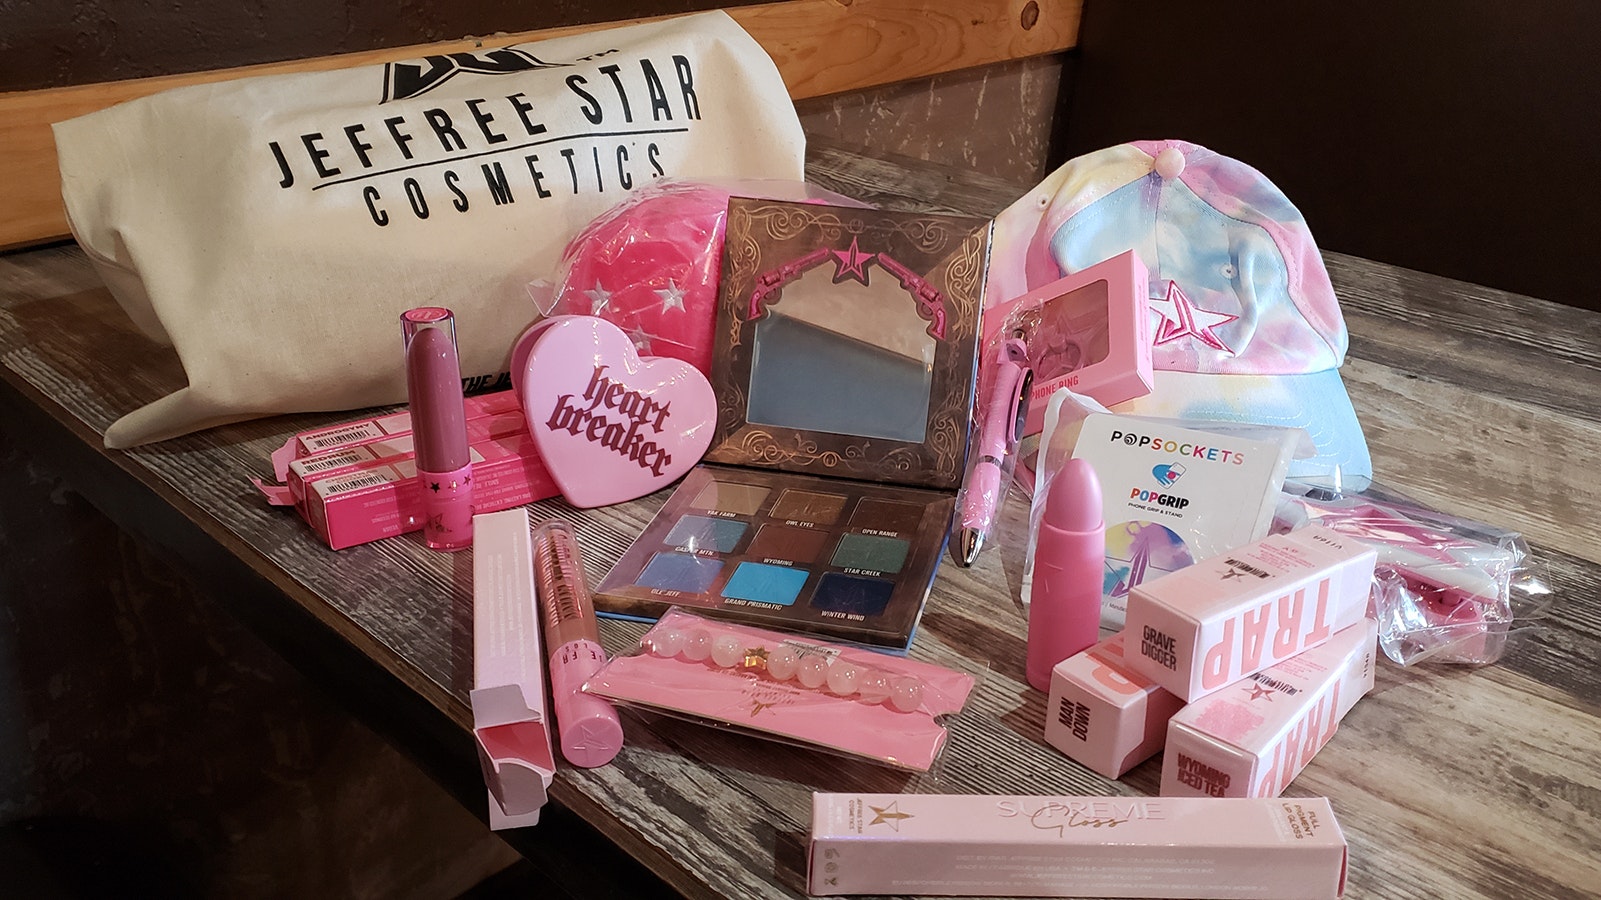 The first 500 customers in the Jeffree Star store got a gift bag with purchase that contained several lip glosses, lipsticks, a Wyoming eye shadow palette, hat pen and more.